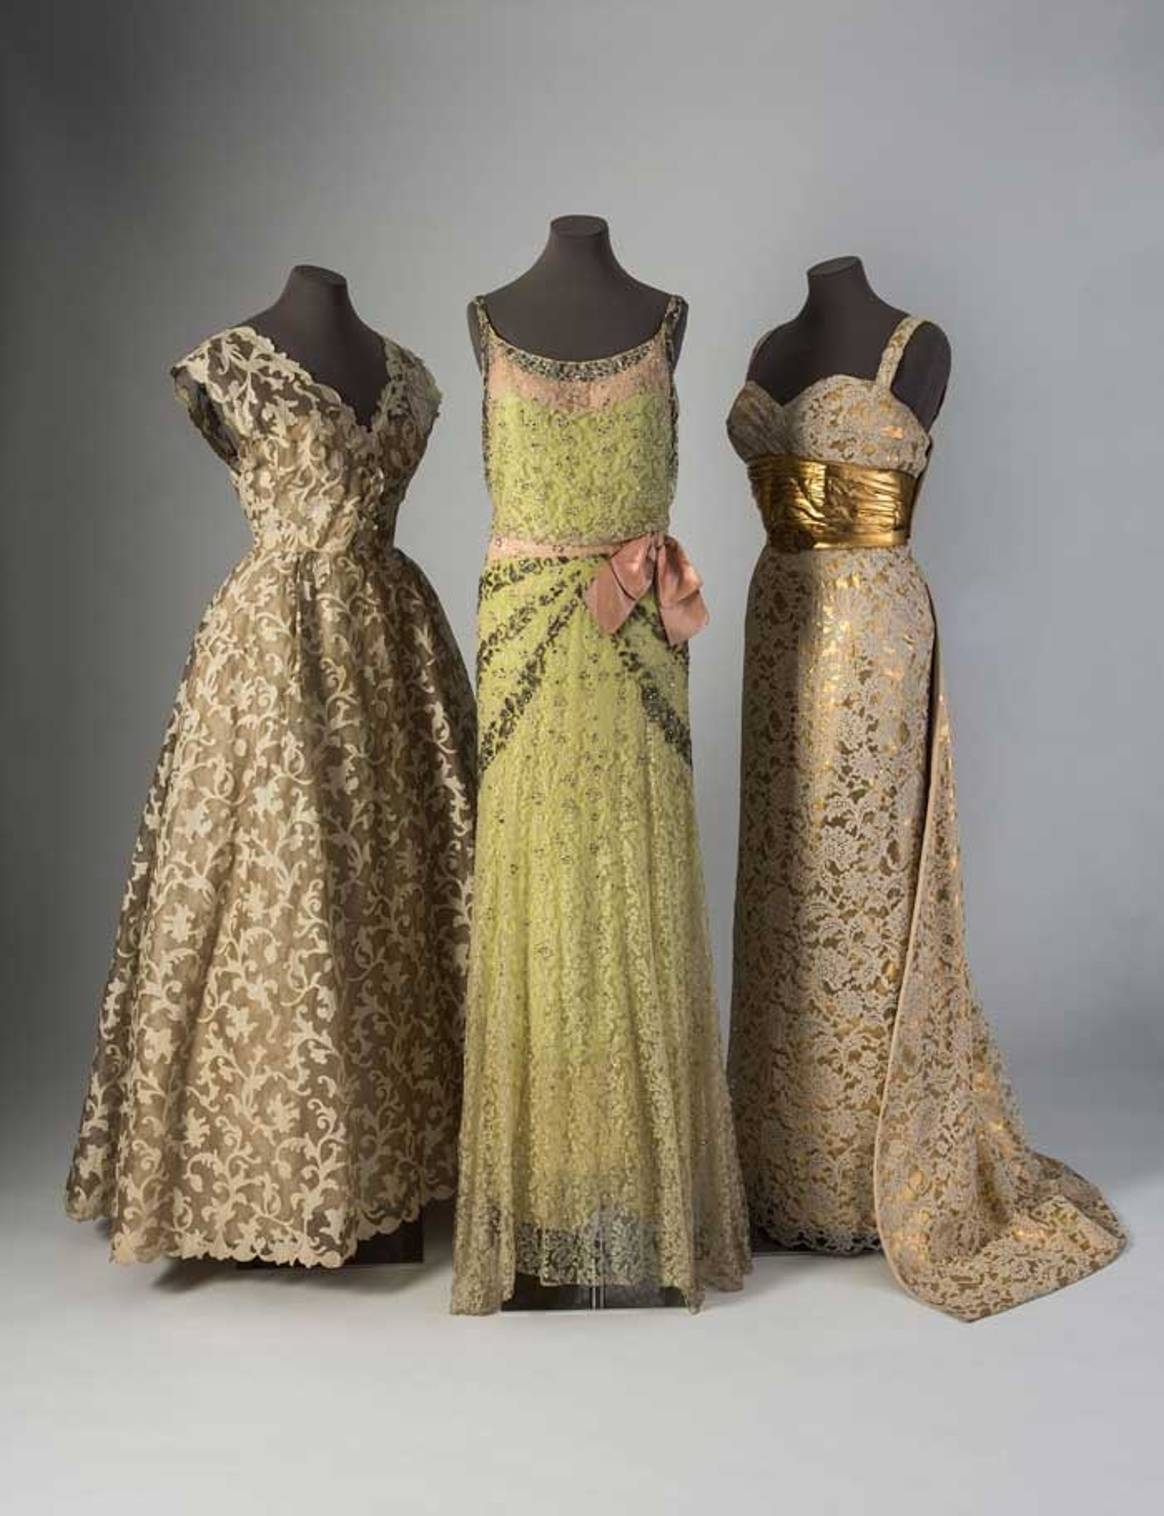 Fashion Museum to stage ‘Lace in Fashion’ exhibition